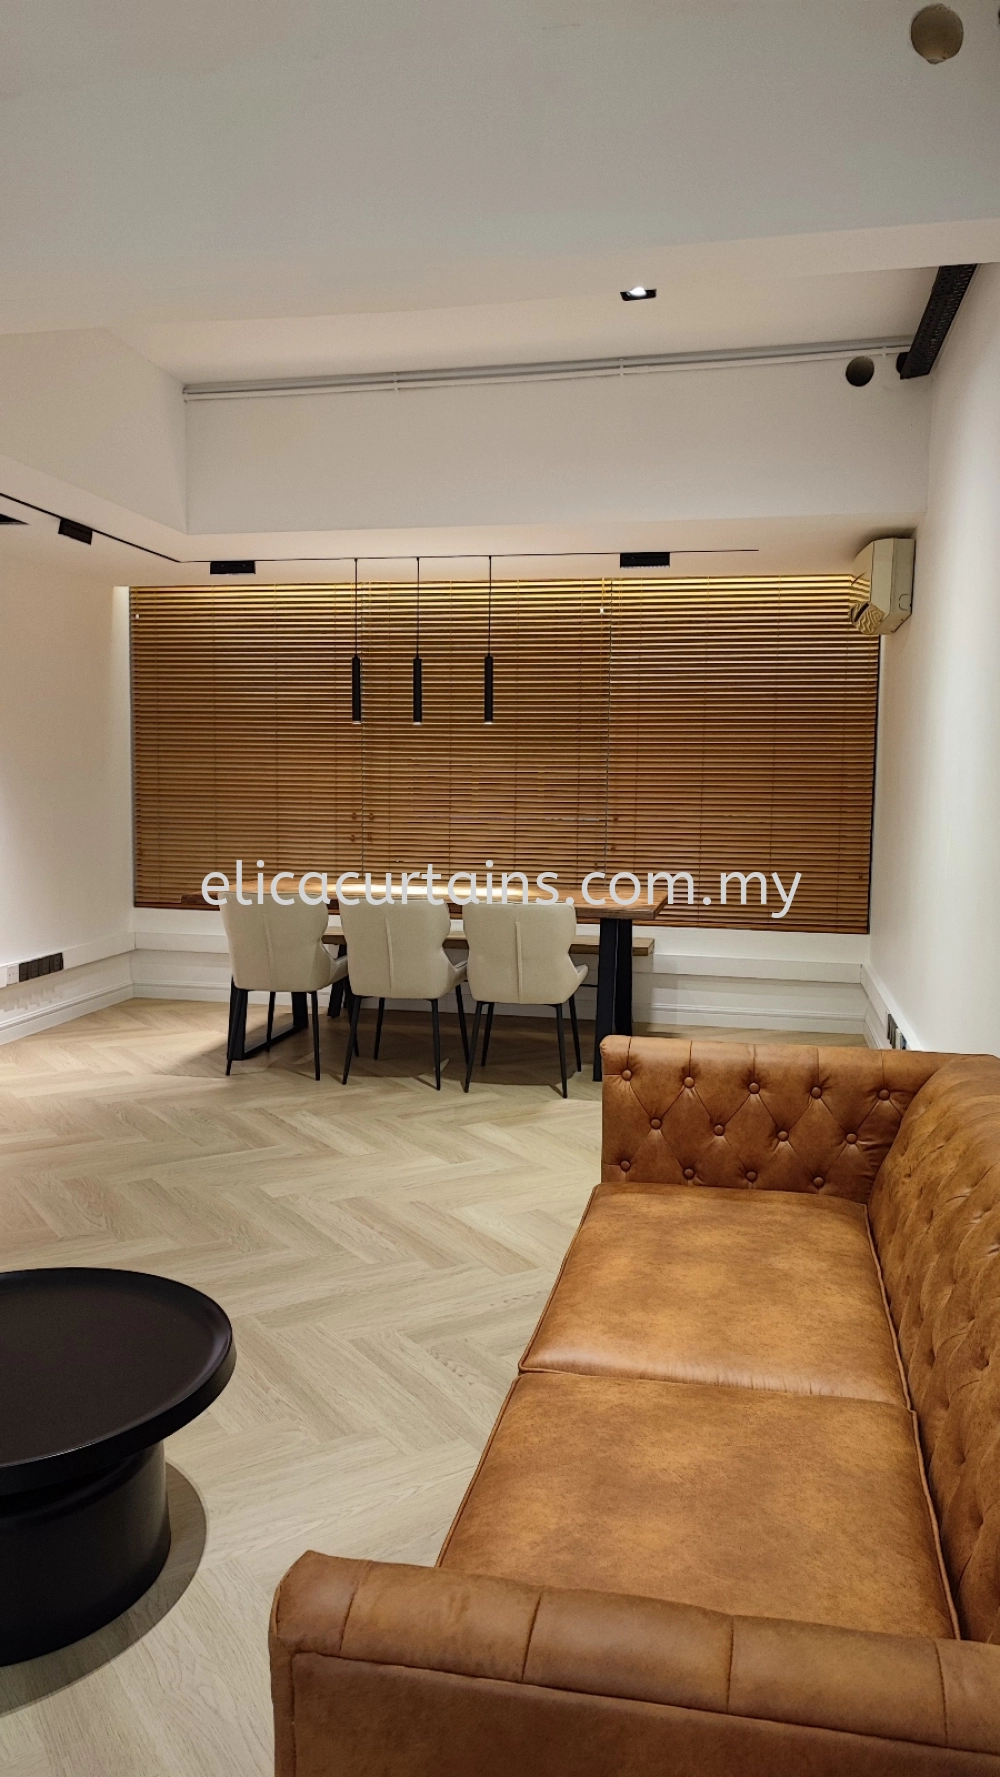 Wooden Timber Blind, Natural Wood Colour, Relaxing Area, Morden Concept, Light Control.